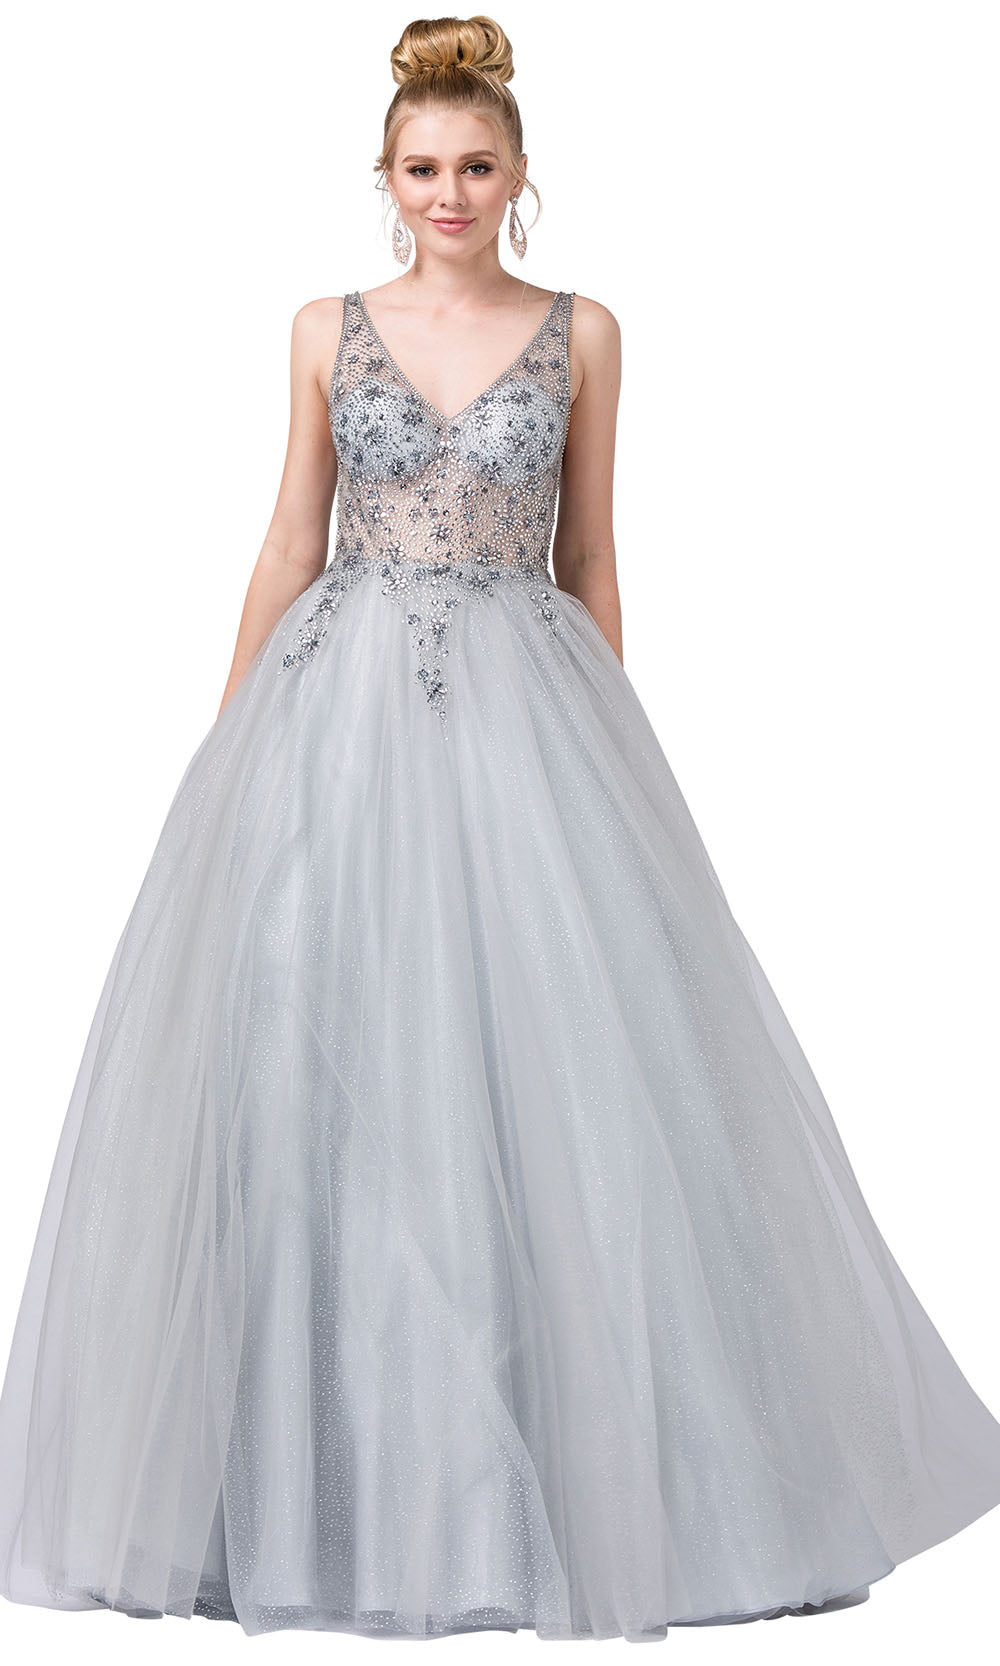 Dancing Queen - 2816 Shimmering Fit And Flare Tulle Ballgown In Silver